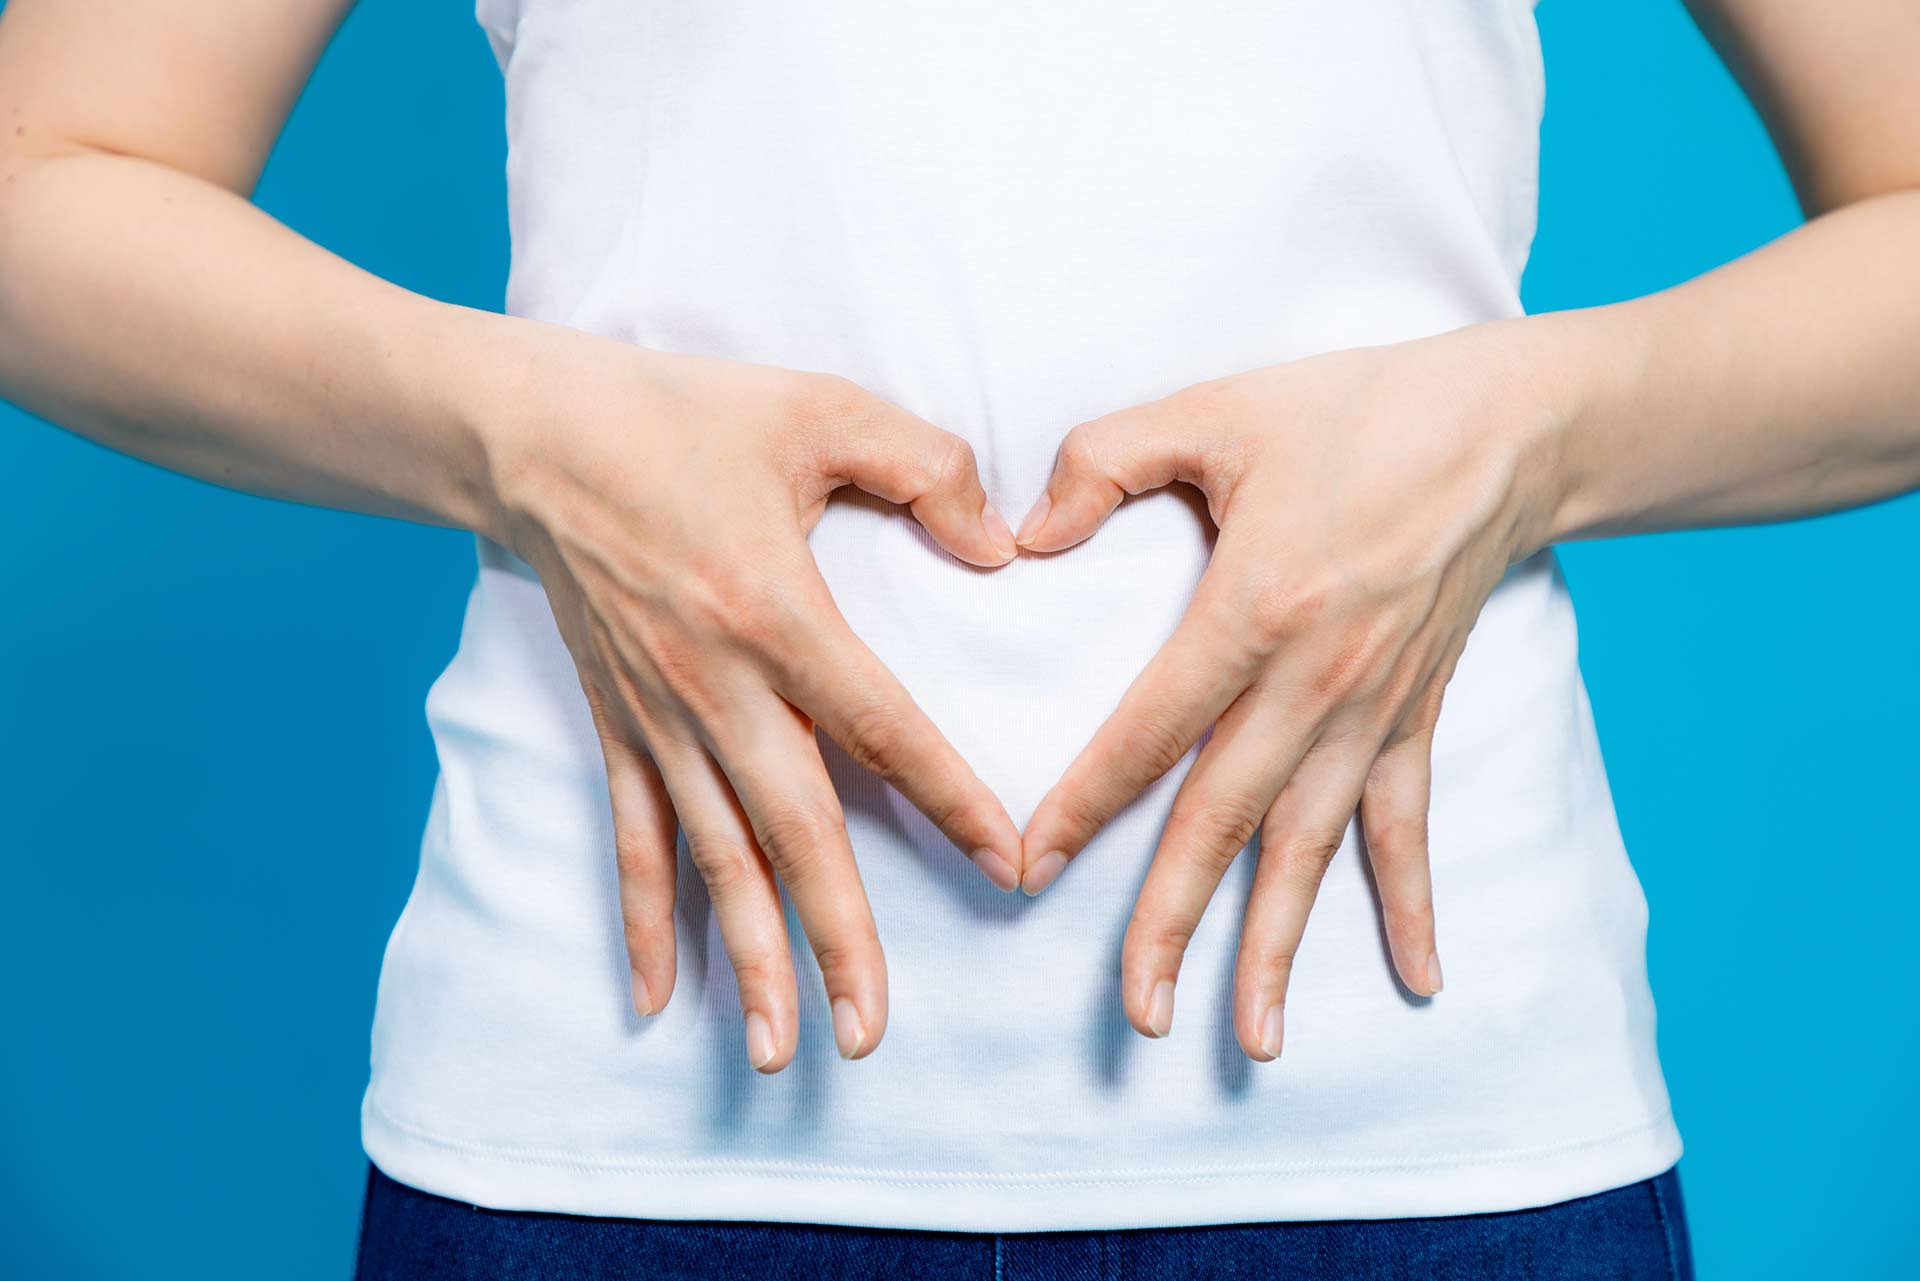 Hands forming a heart over the gut